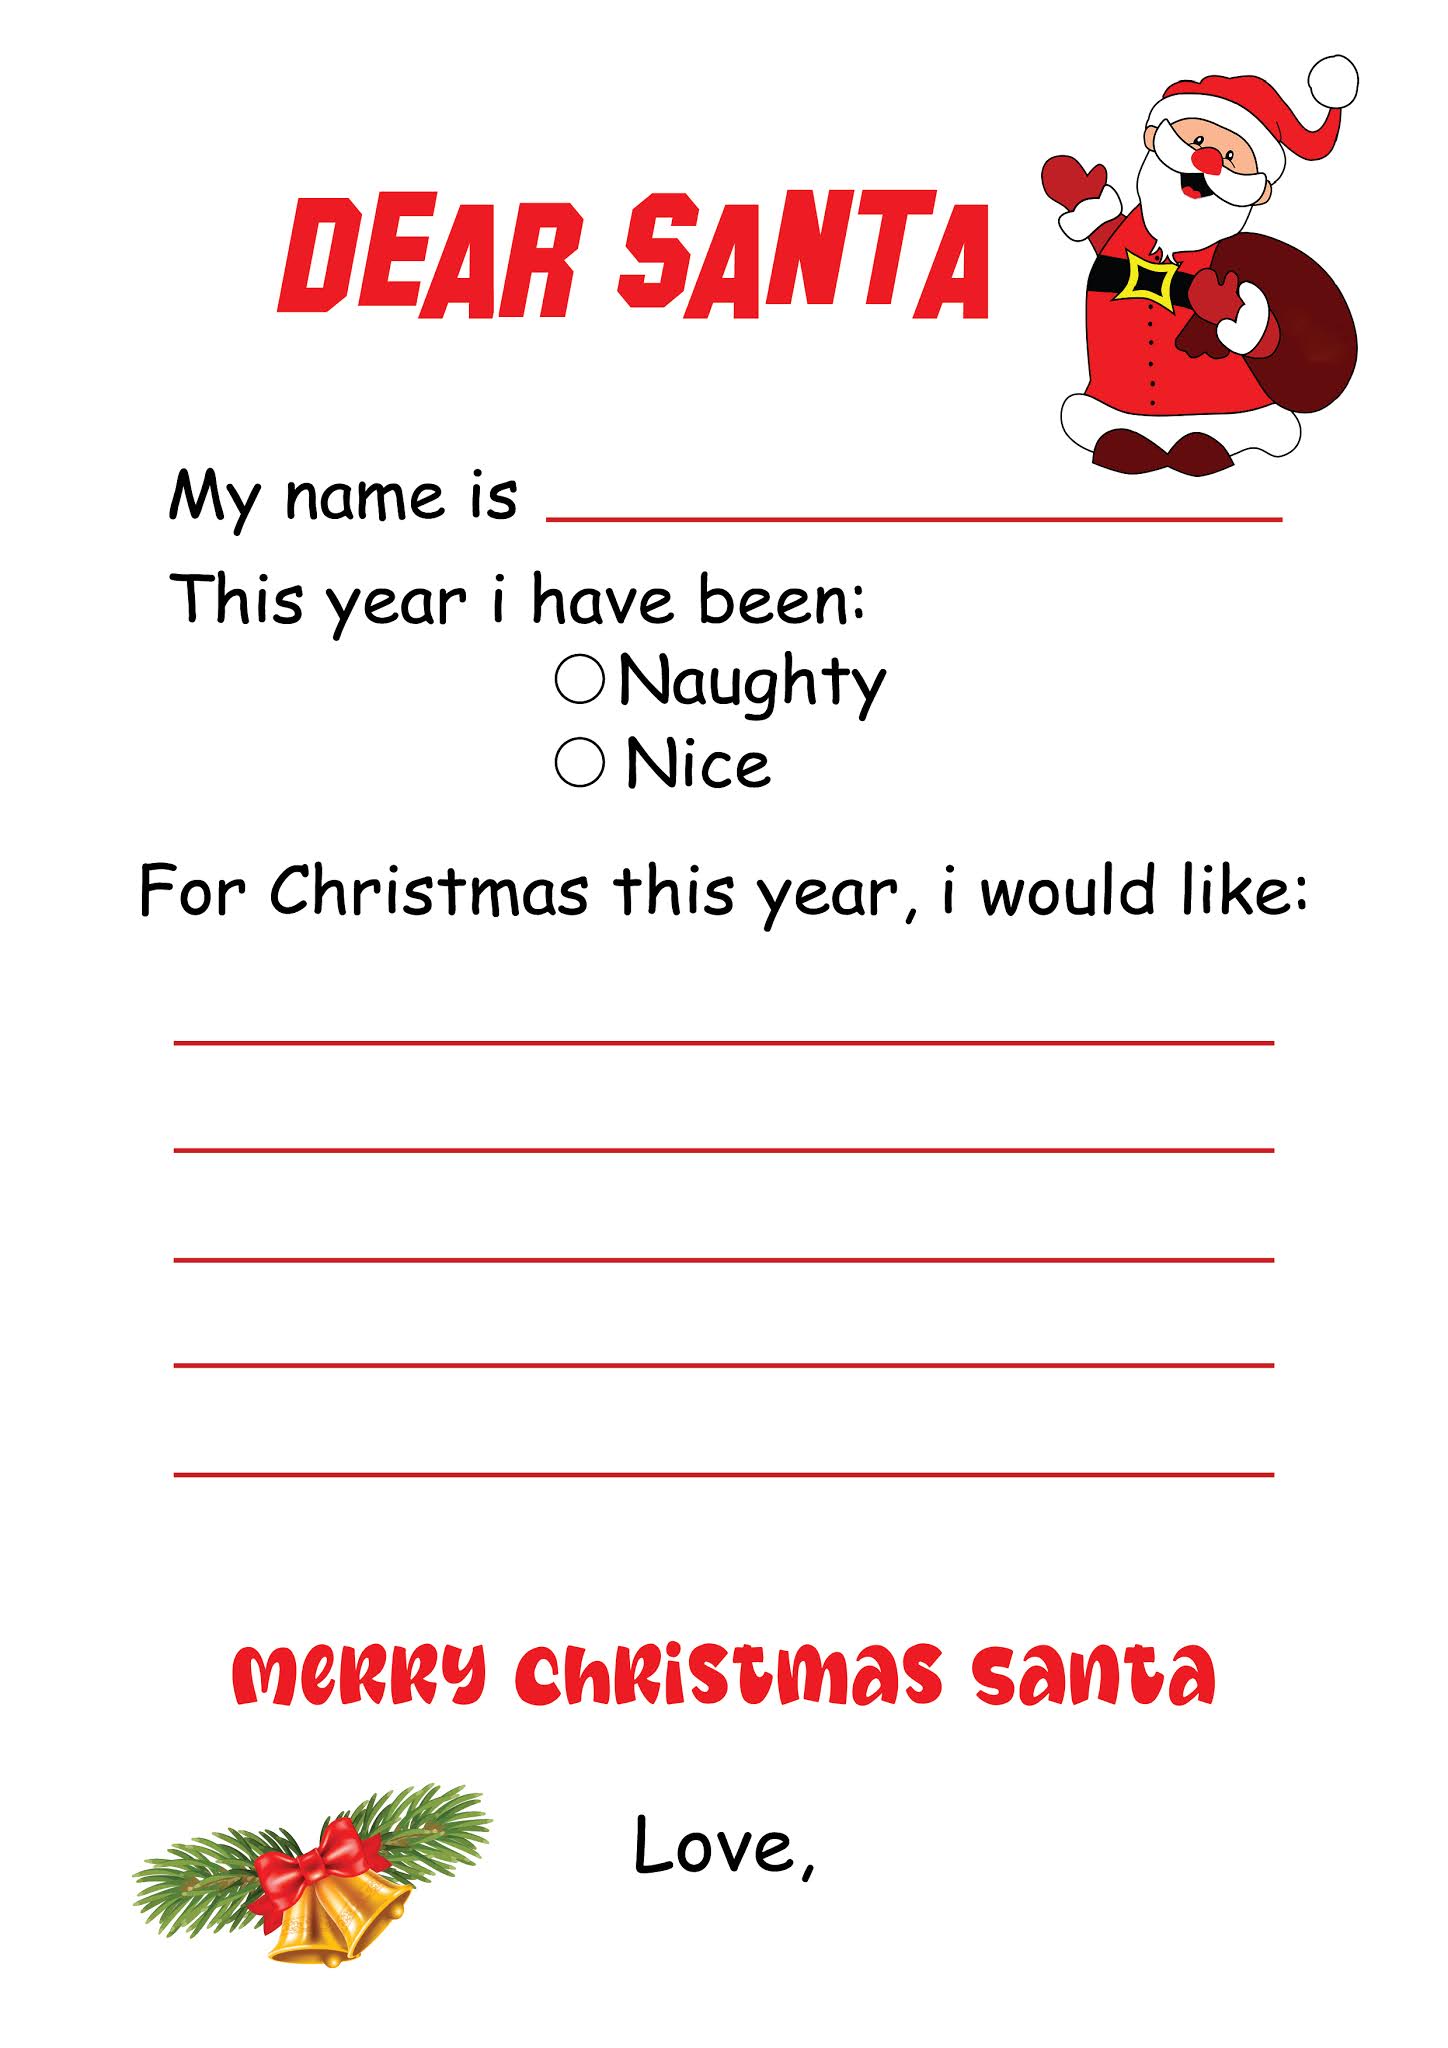 christmas-letter-templates-15-free-printable-christmas-wishes-letter